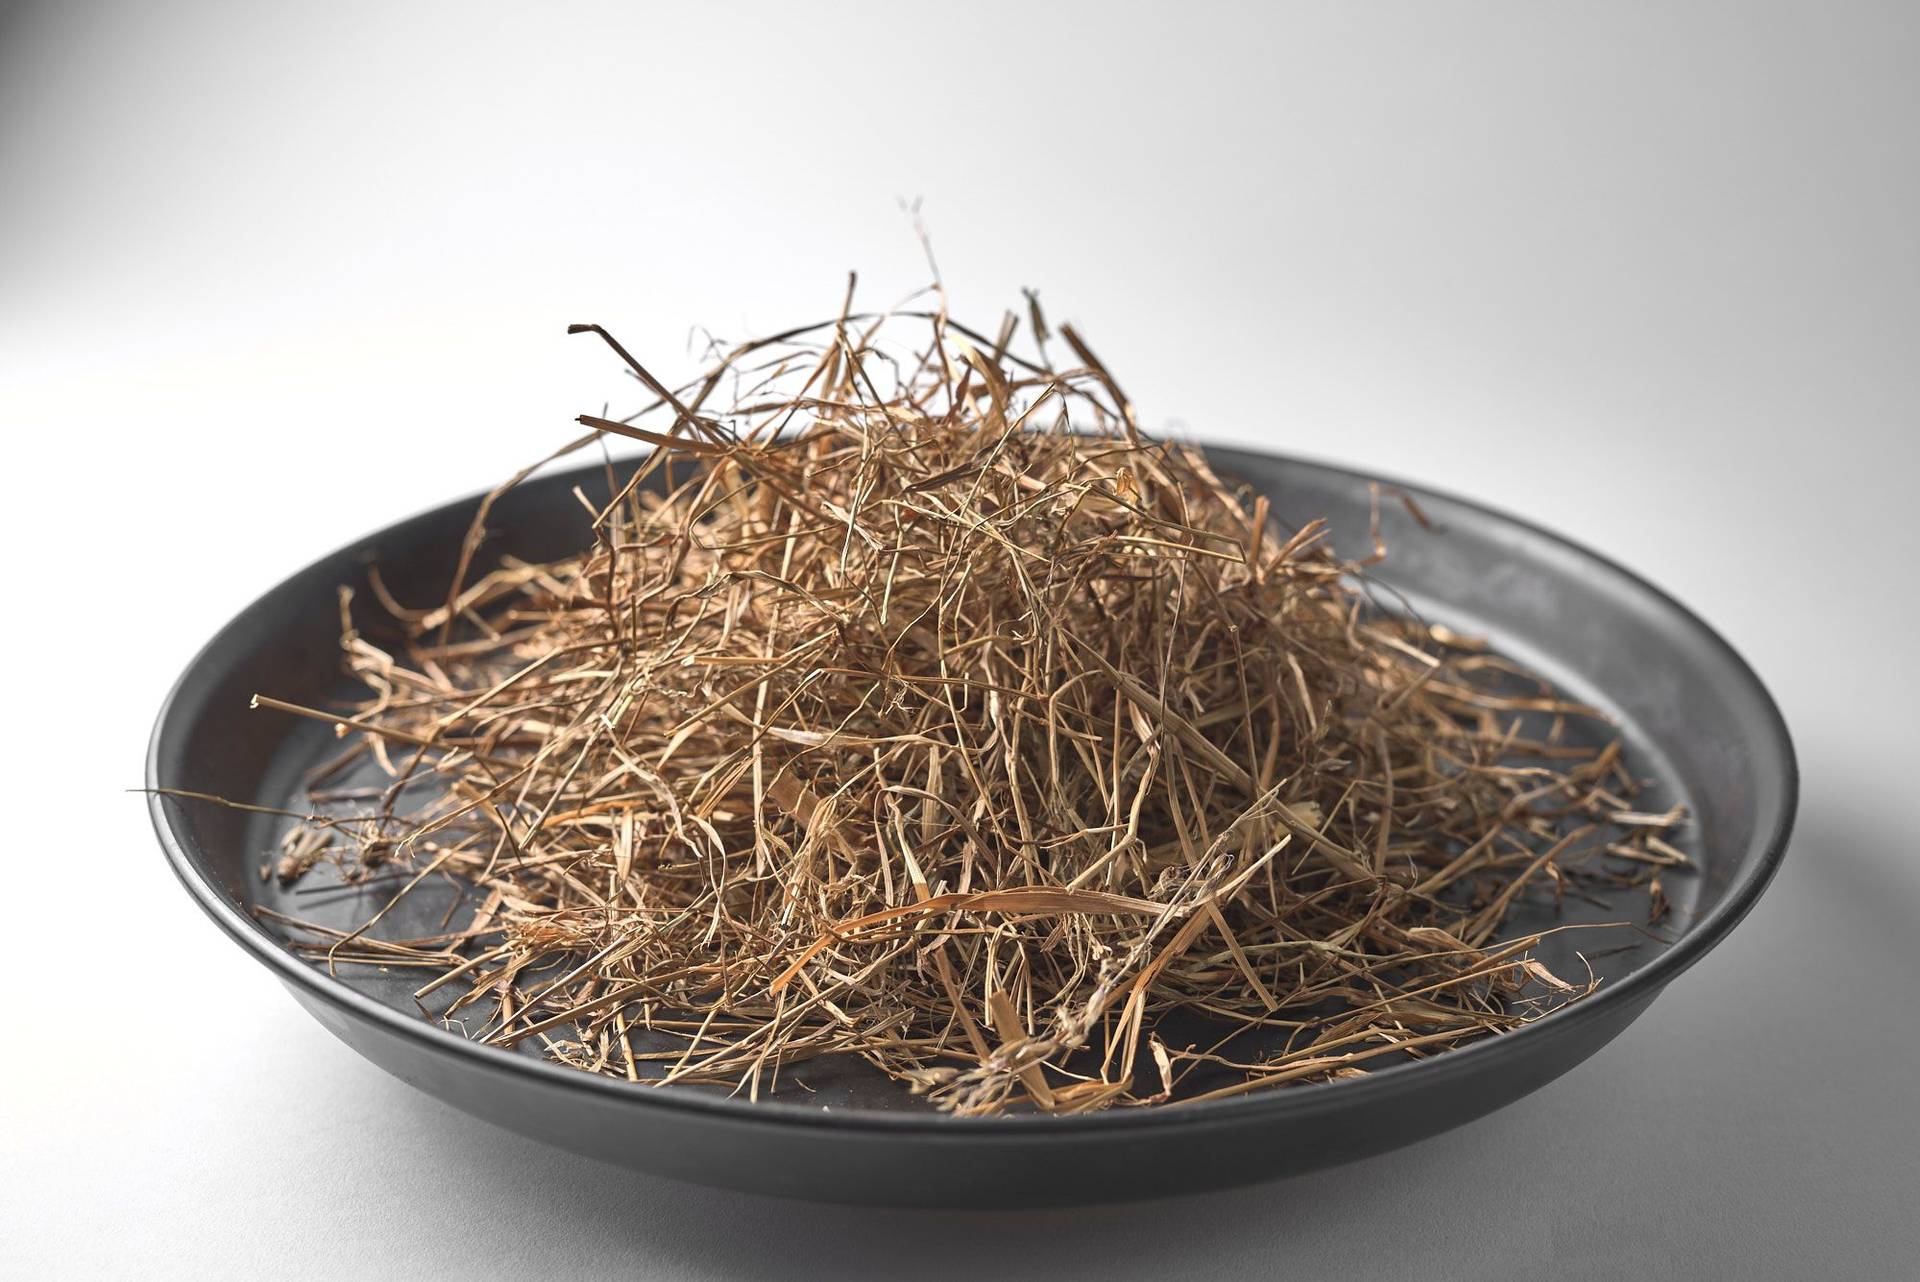 toasted hay in a baking pan on white background